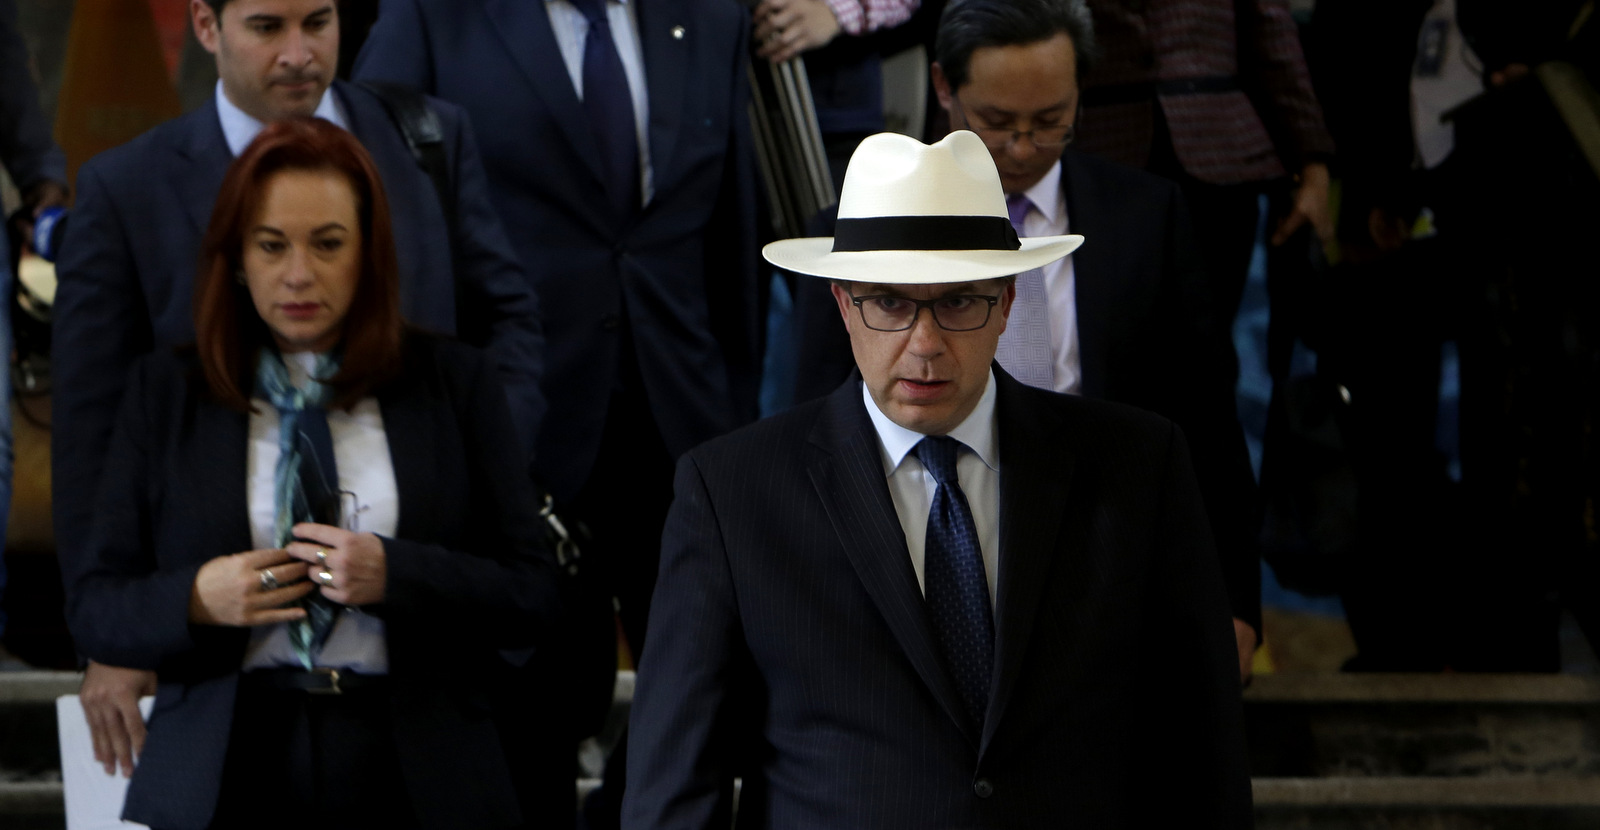 United States ambassador Todd Chapman (wearing white hat) and others accompanied by Ecuador's Foreign Minister Fernanda Espinosa, left, leave the government palace after a meeting where the ambassadors showed their support for Ecuador's government in view of the recent events on the border between Ecuador and Colombia, in Quito, Ecuador, April 17, 2018. (AP/Dolores Ochoa)